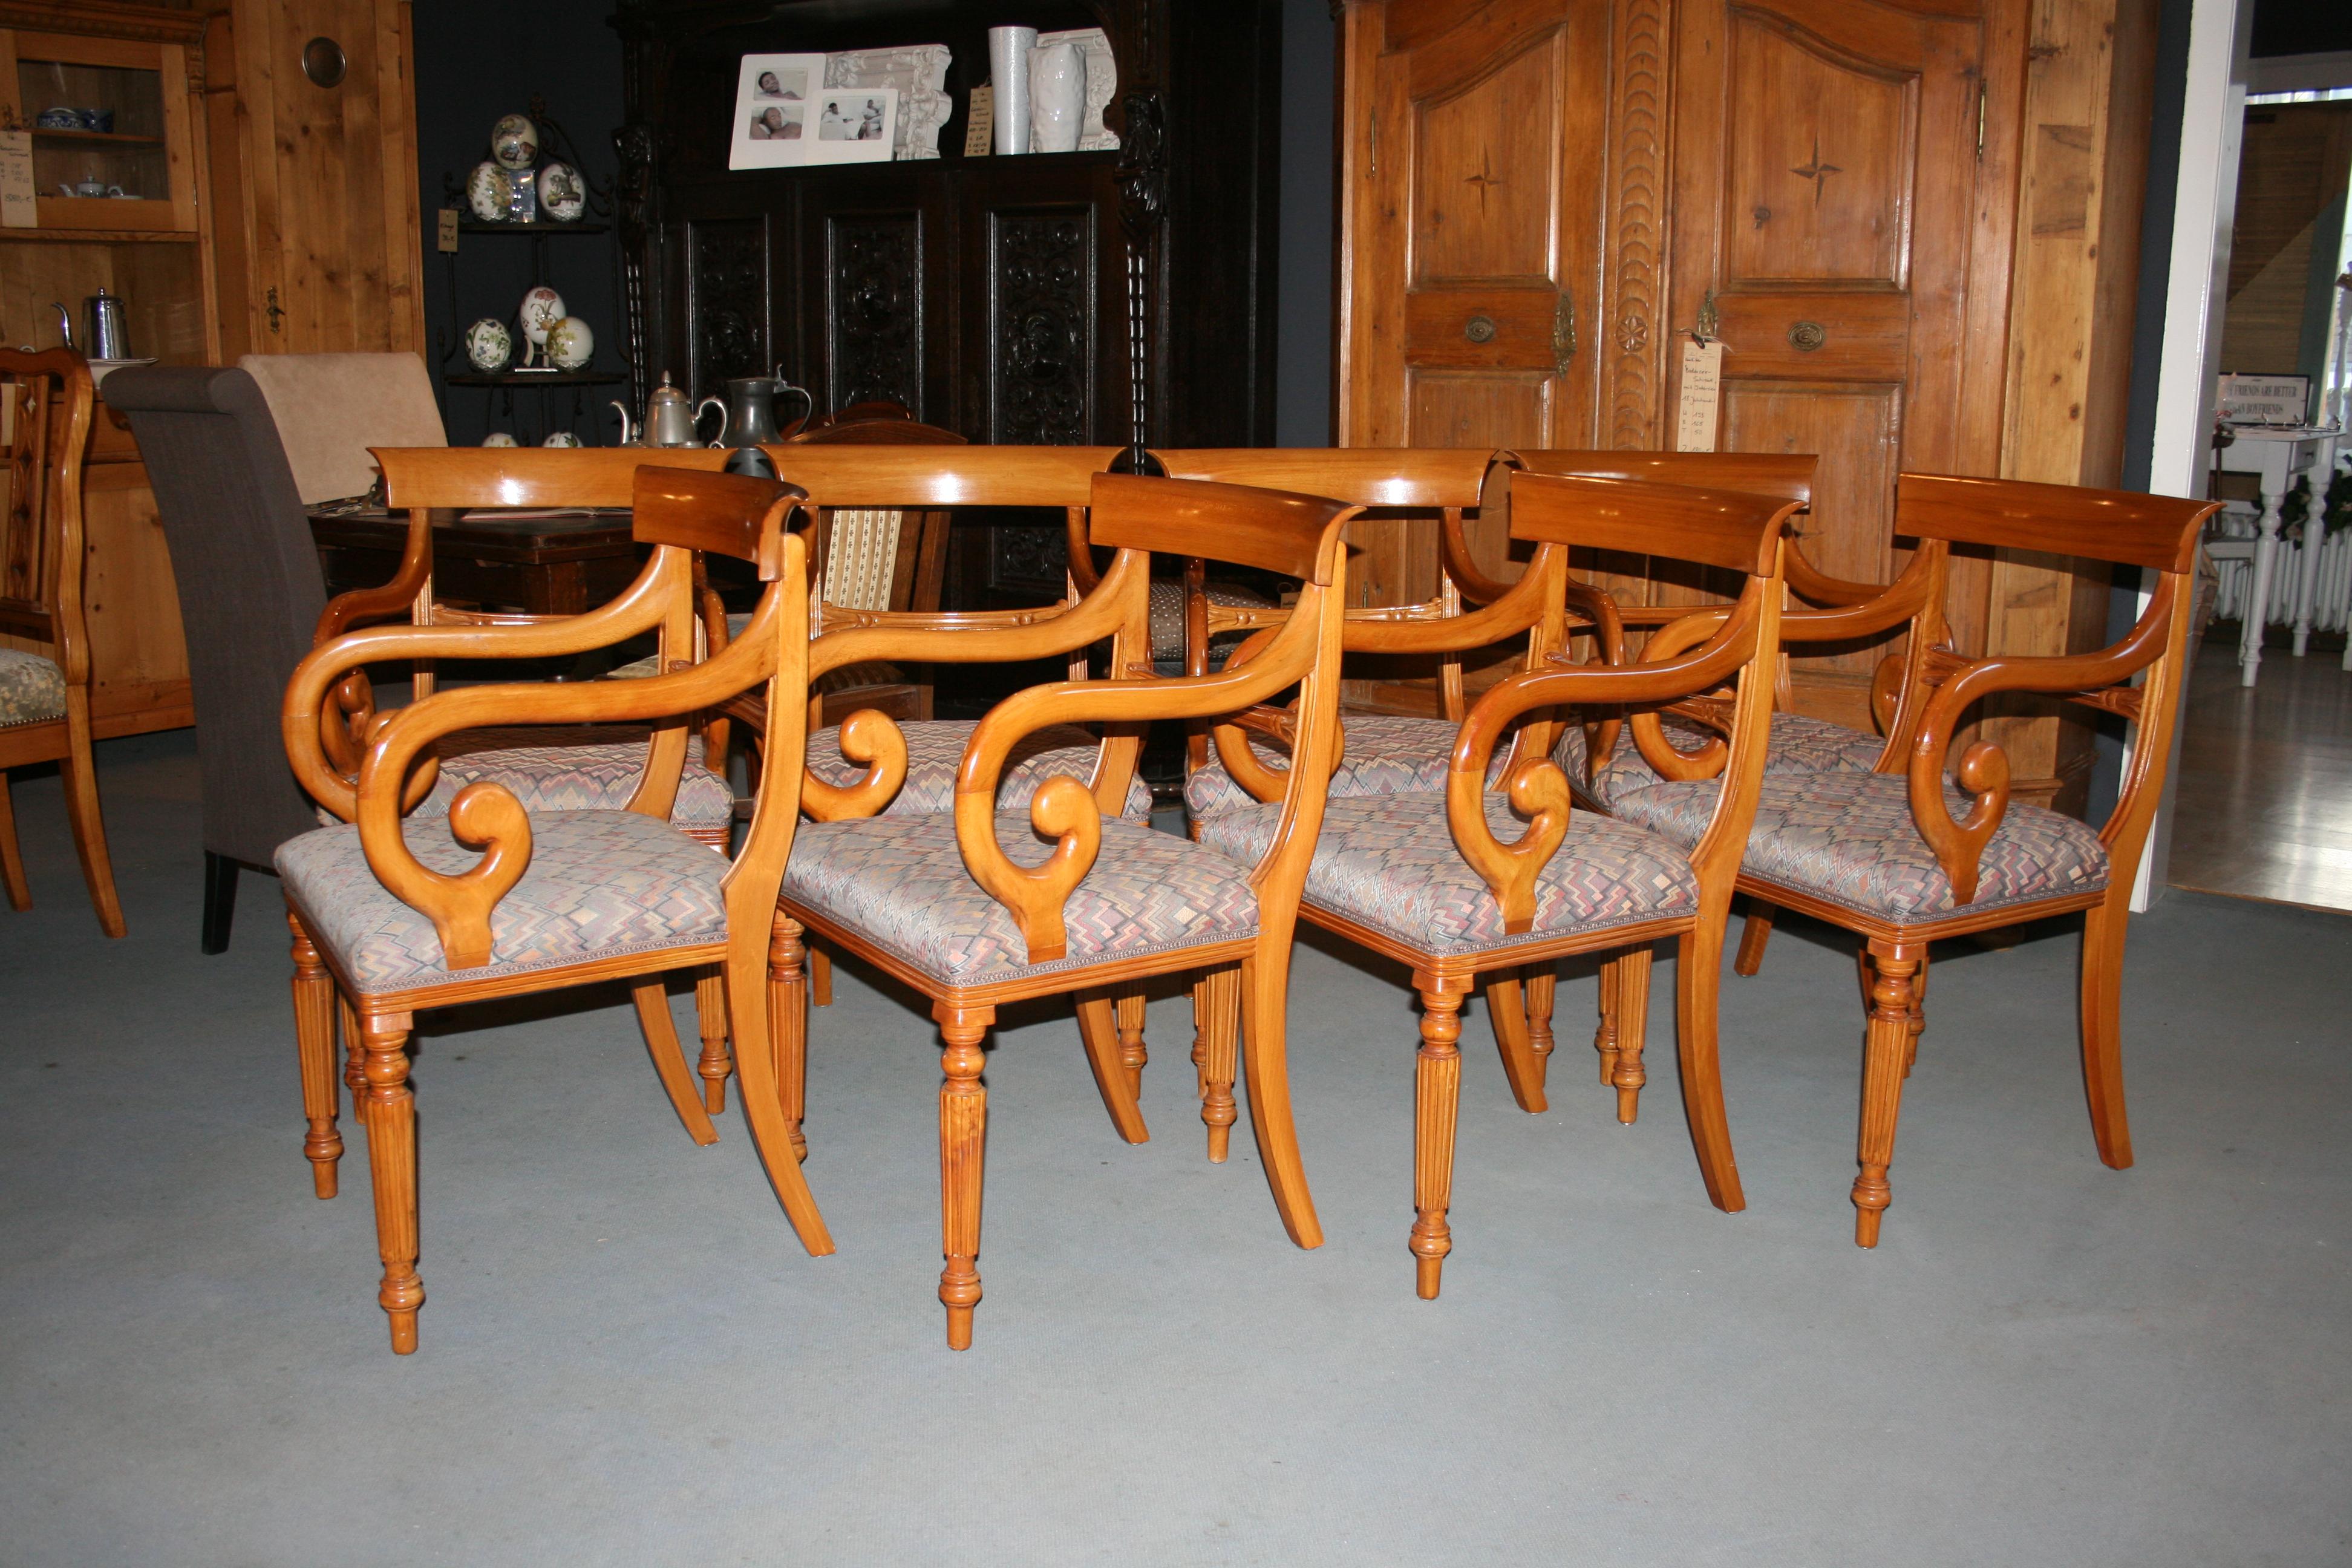 Beautiful group of armchairs consisting of 8 so-called saber-chairs made of bentwood (stained in cherry wood color) in Biedermeier style. 

Dimensions: 89 cm high, 55 cm wide, 51 cm deep; seat height 48 cm